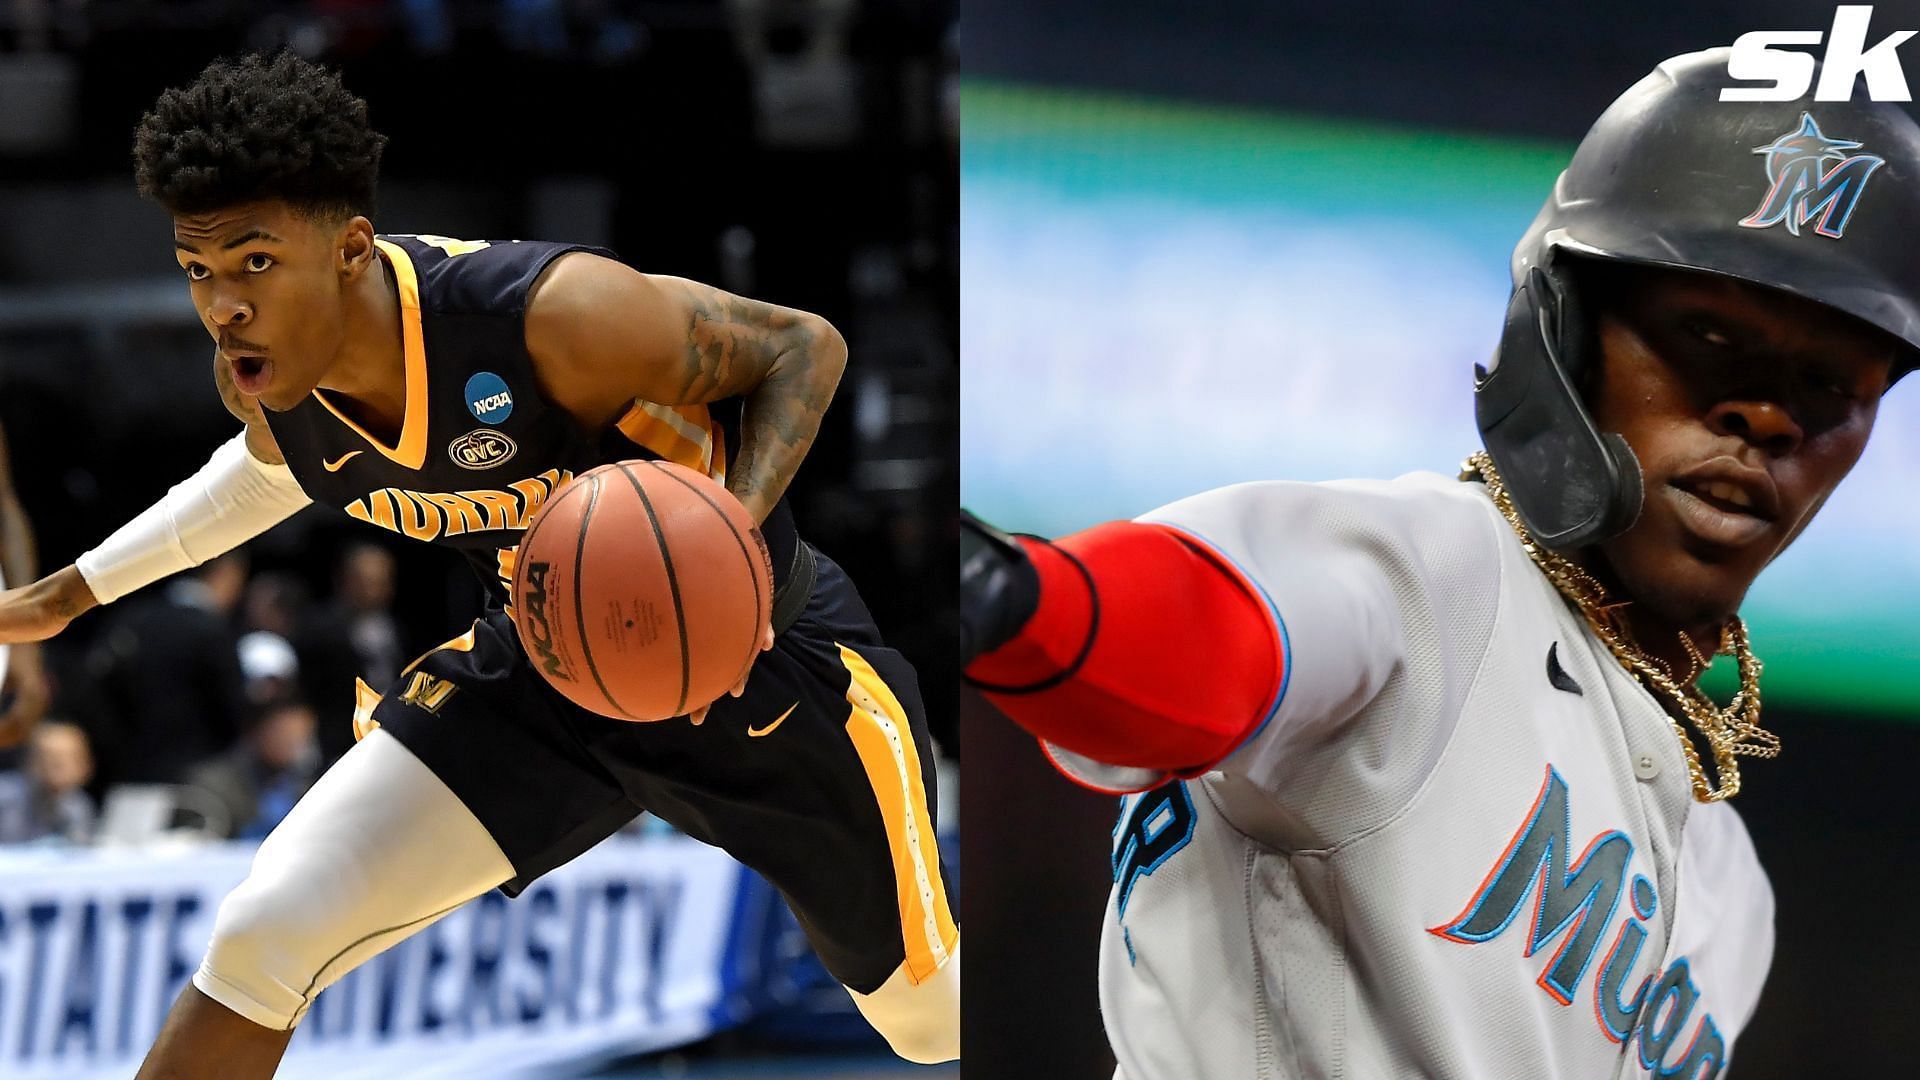 Jazz Chisholm Jr has compared himself to Ja Morant of the Memphis Grizzles